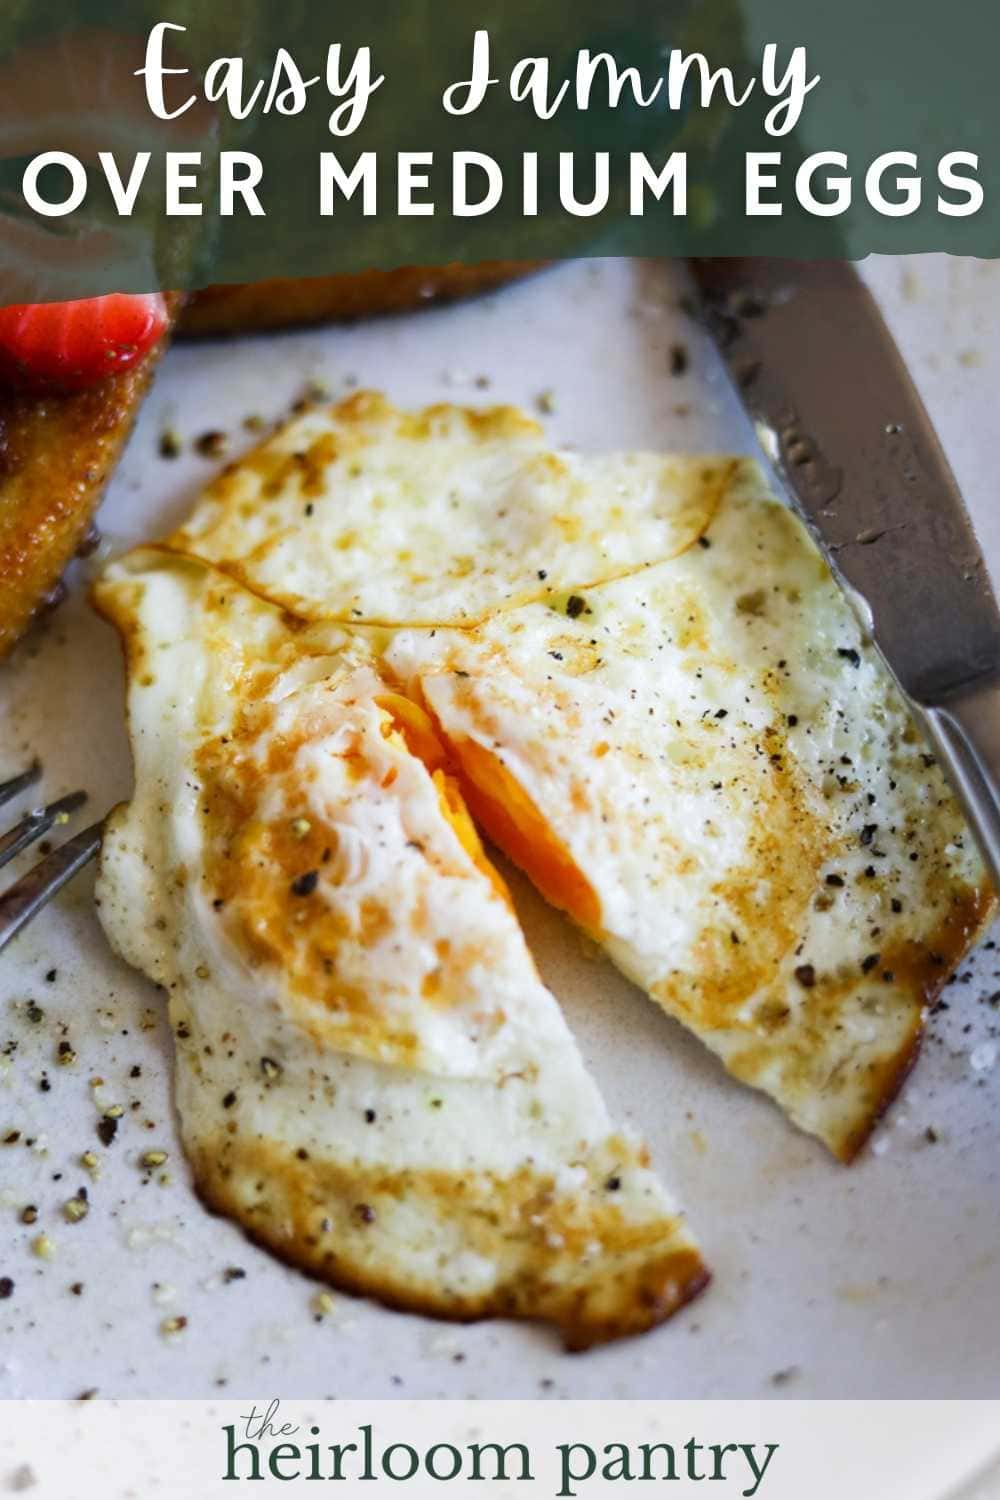 Over medium eggs with butter, salt, and pepper on a plate Pinterest pin.